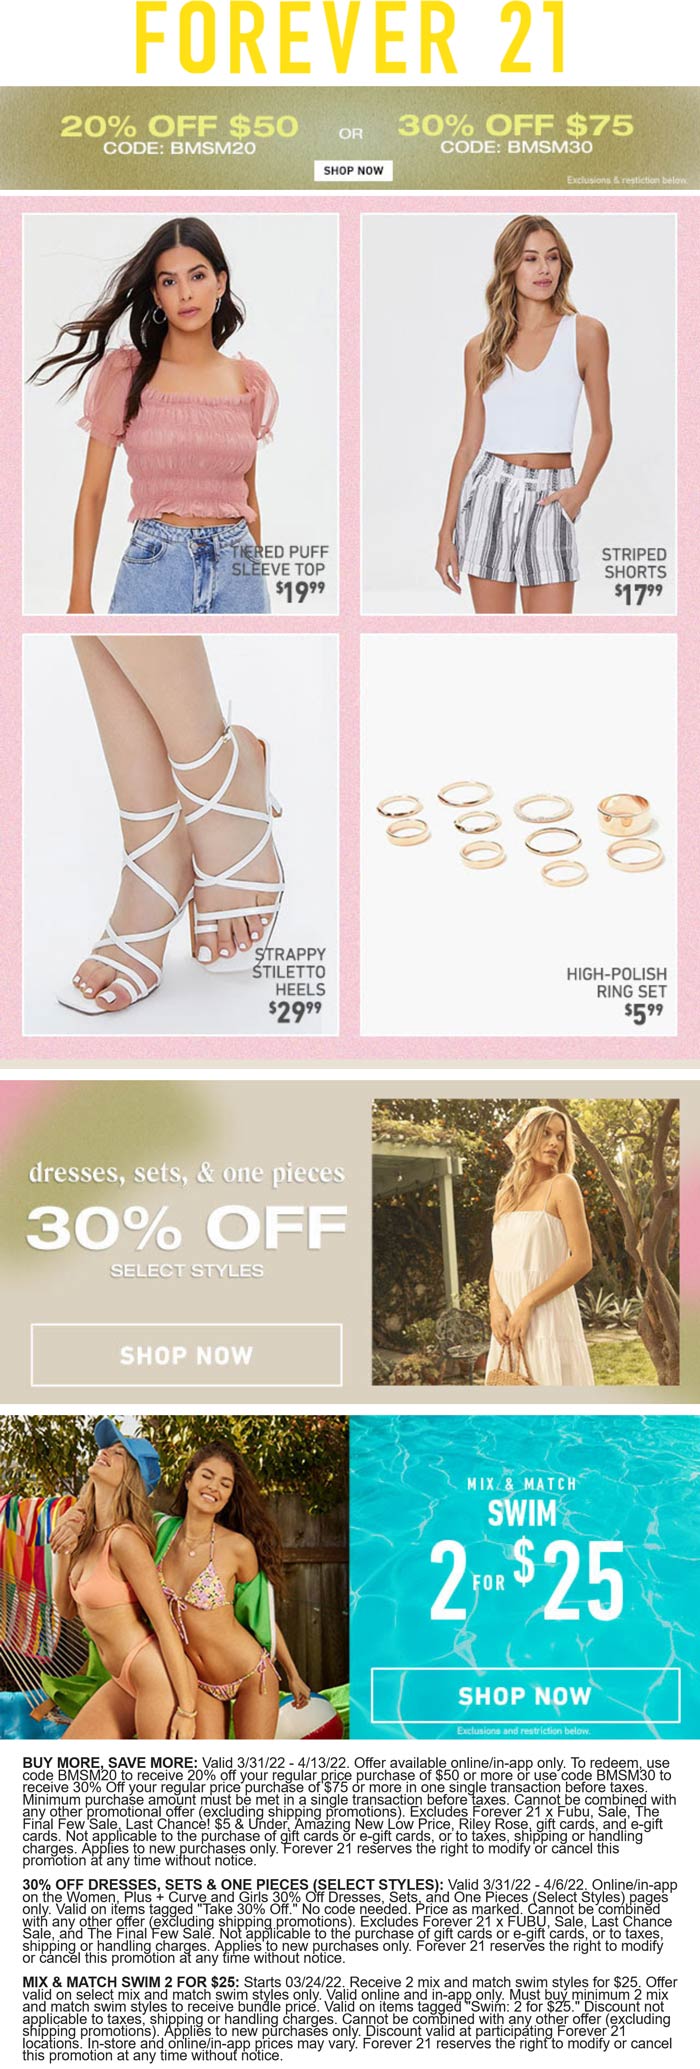 Forever 21 stores Coupon  20% off $50 & more online at Forever 21 via promo code BMSM20 #forever21 